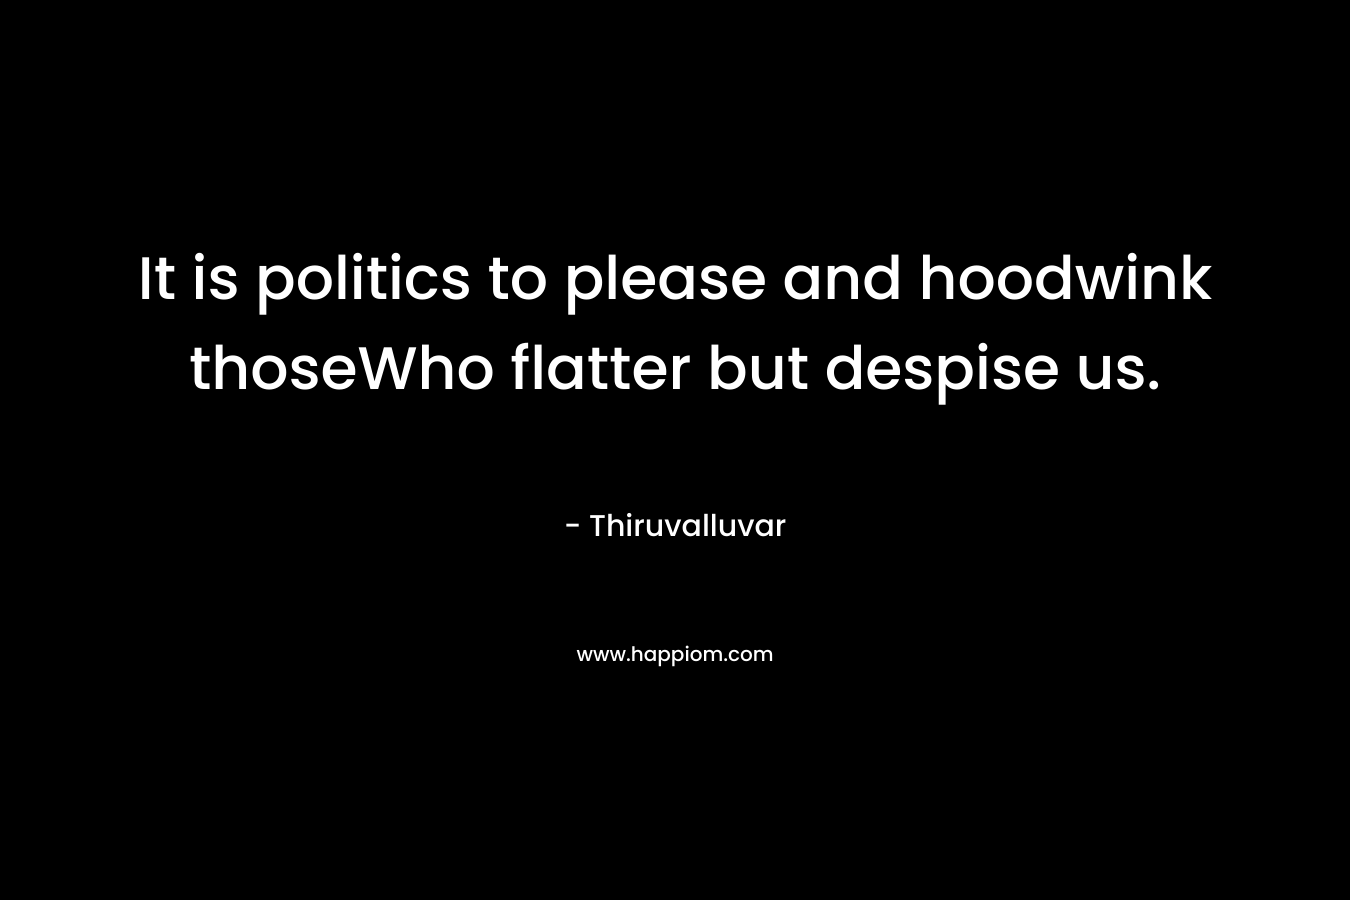 It is politics to please and hoodwink thoseWho flatter but despise us.